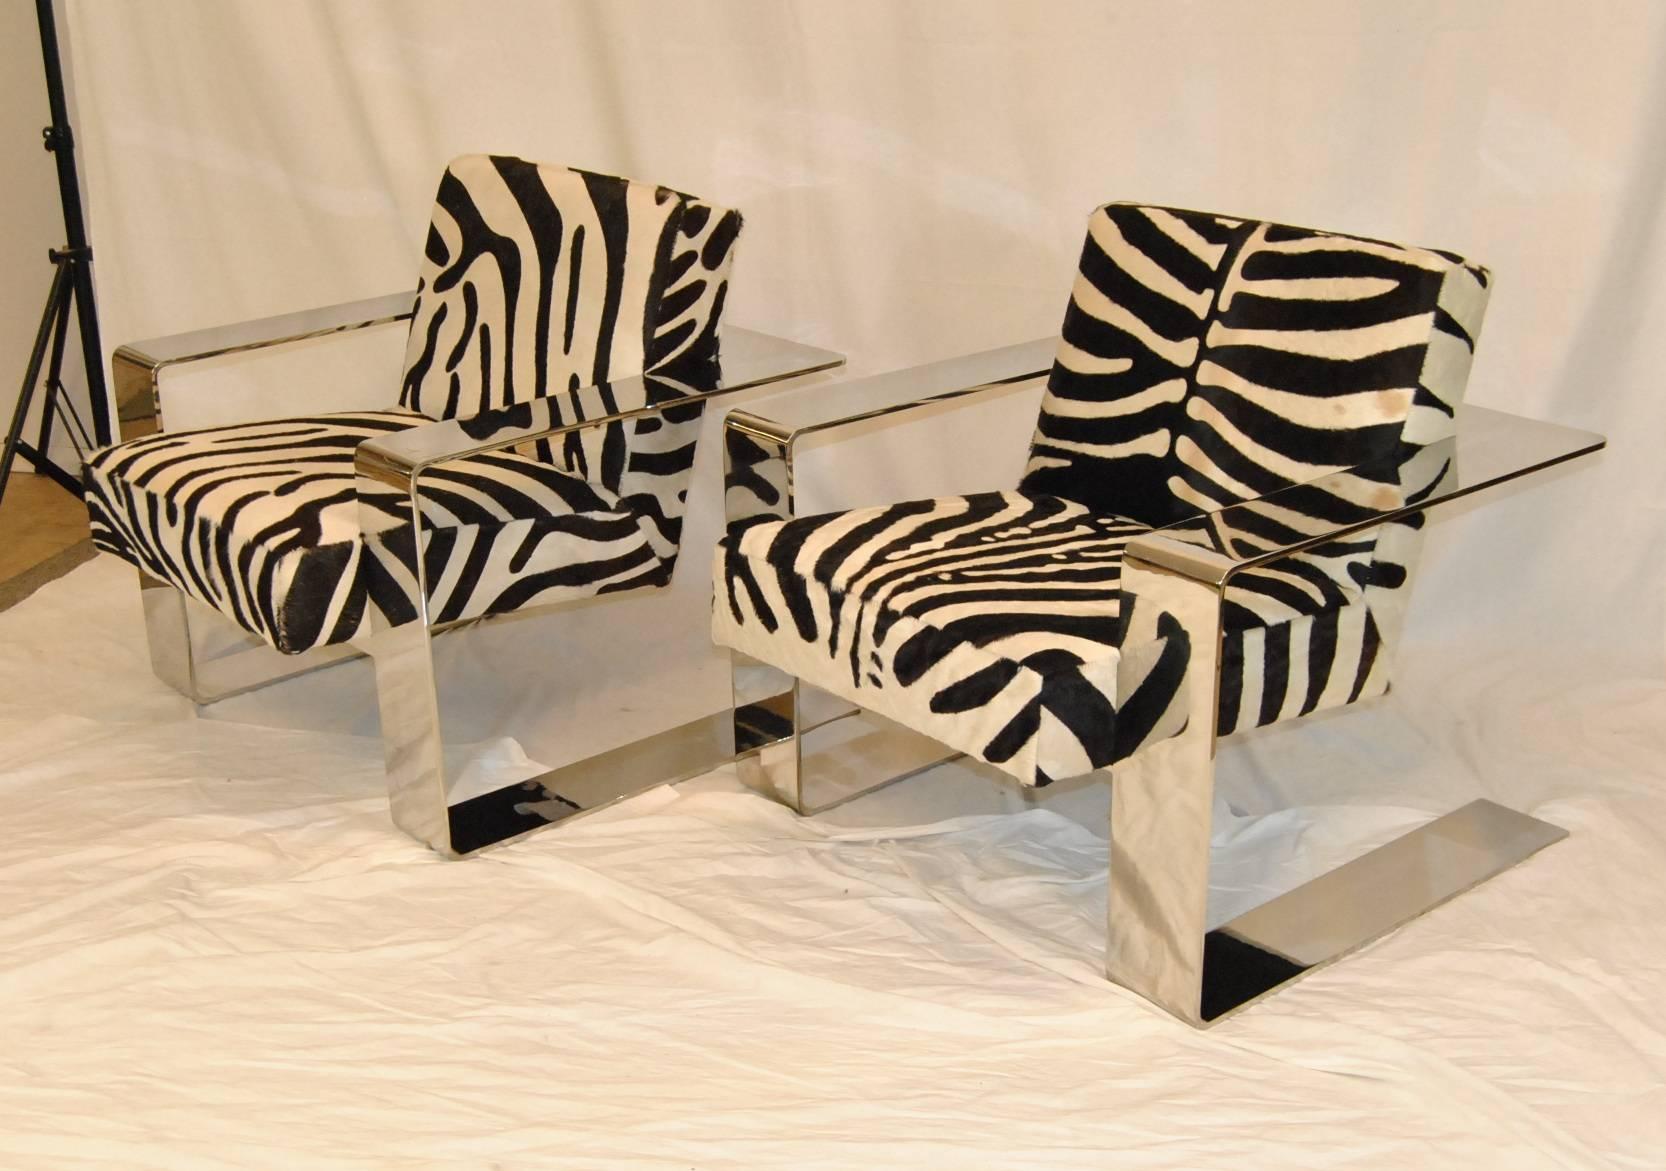 An electric pair of chrome framed Connor chairs by Bernhardt. The Connor chair is upholstered in a zebra printed cowhide that is soft to the touch and has a beautifully designed wide flat chrome base. The Connor chair can be a complement to anyone's